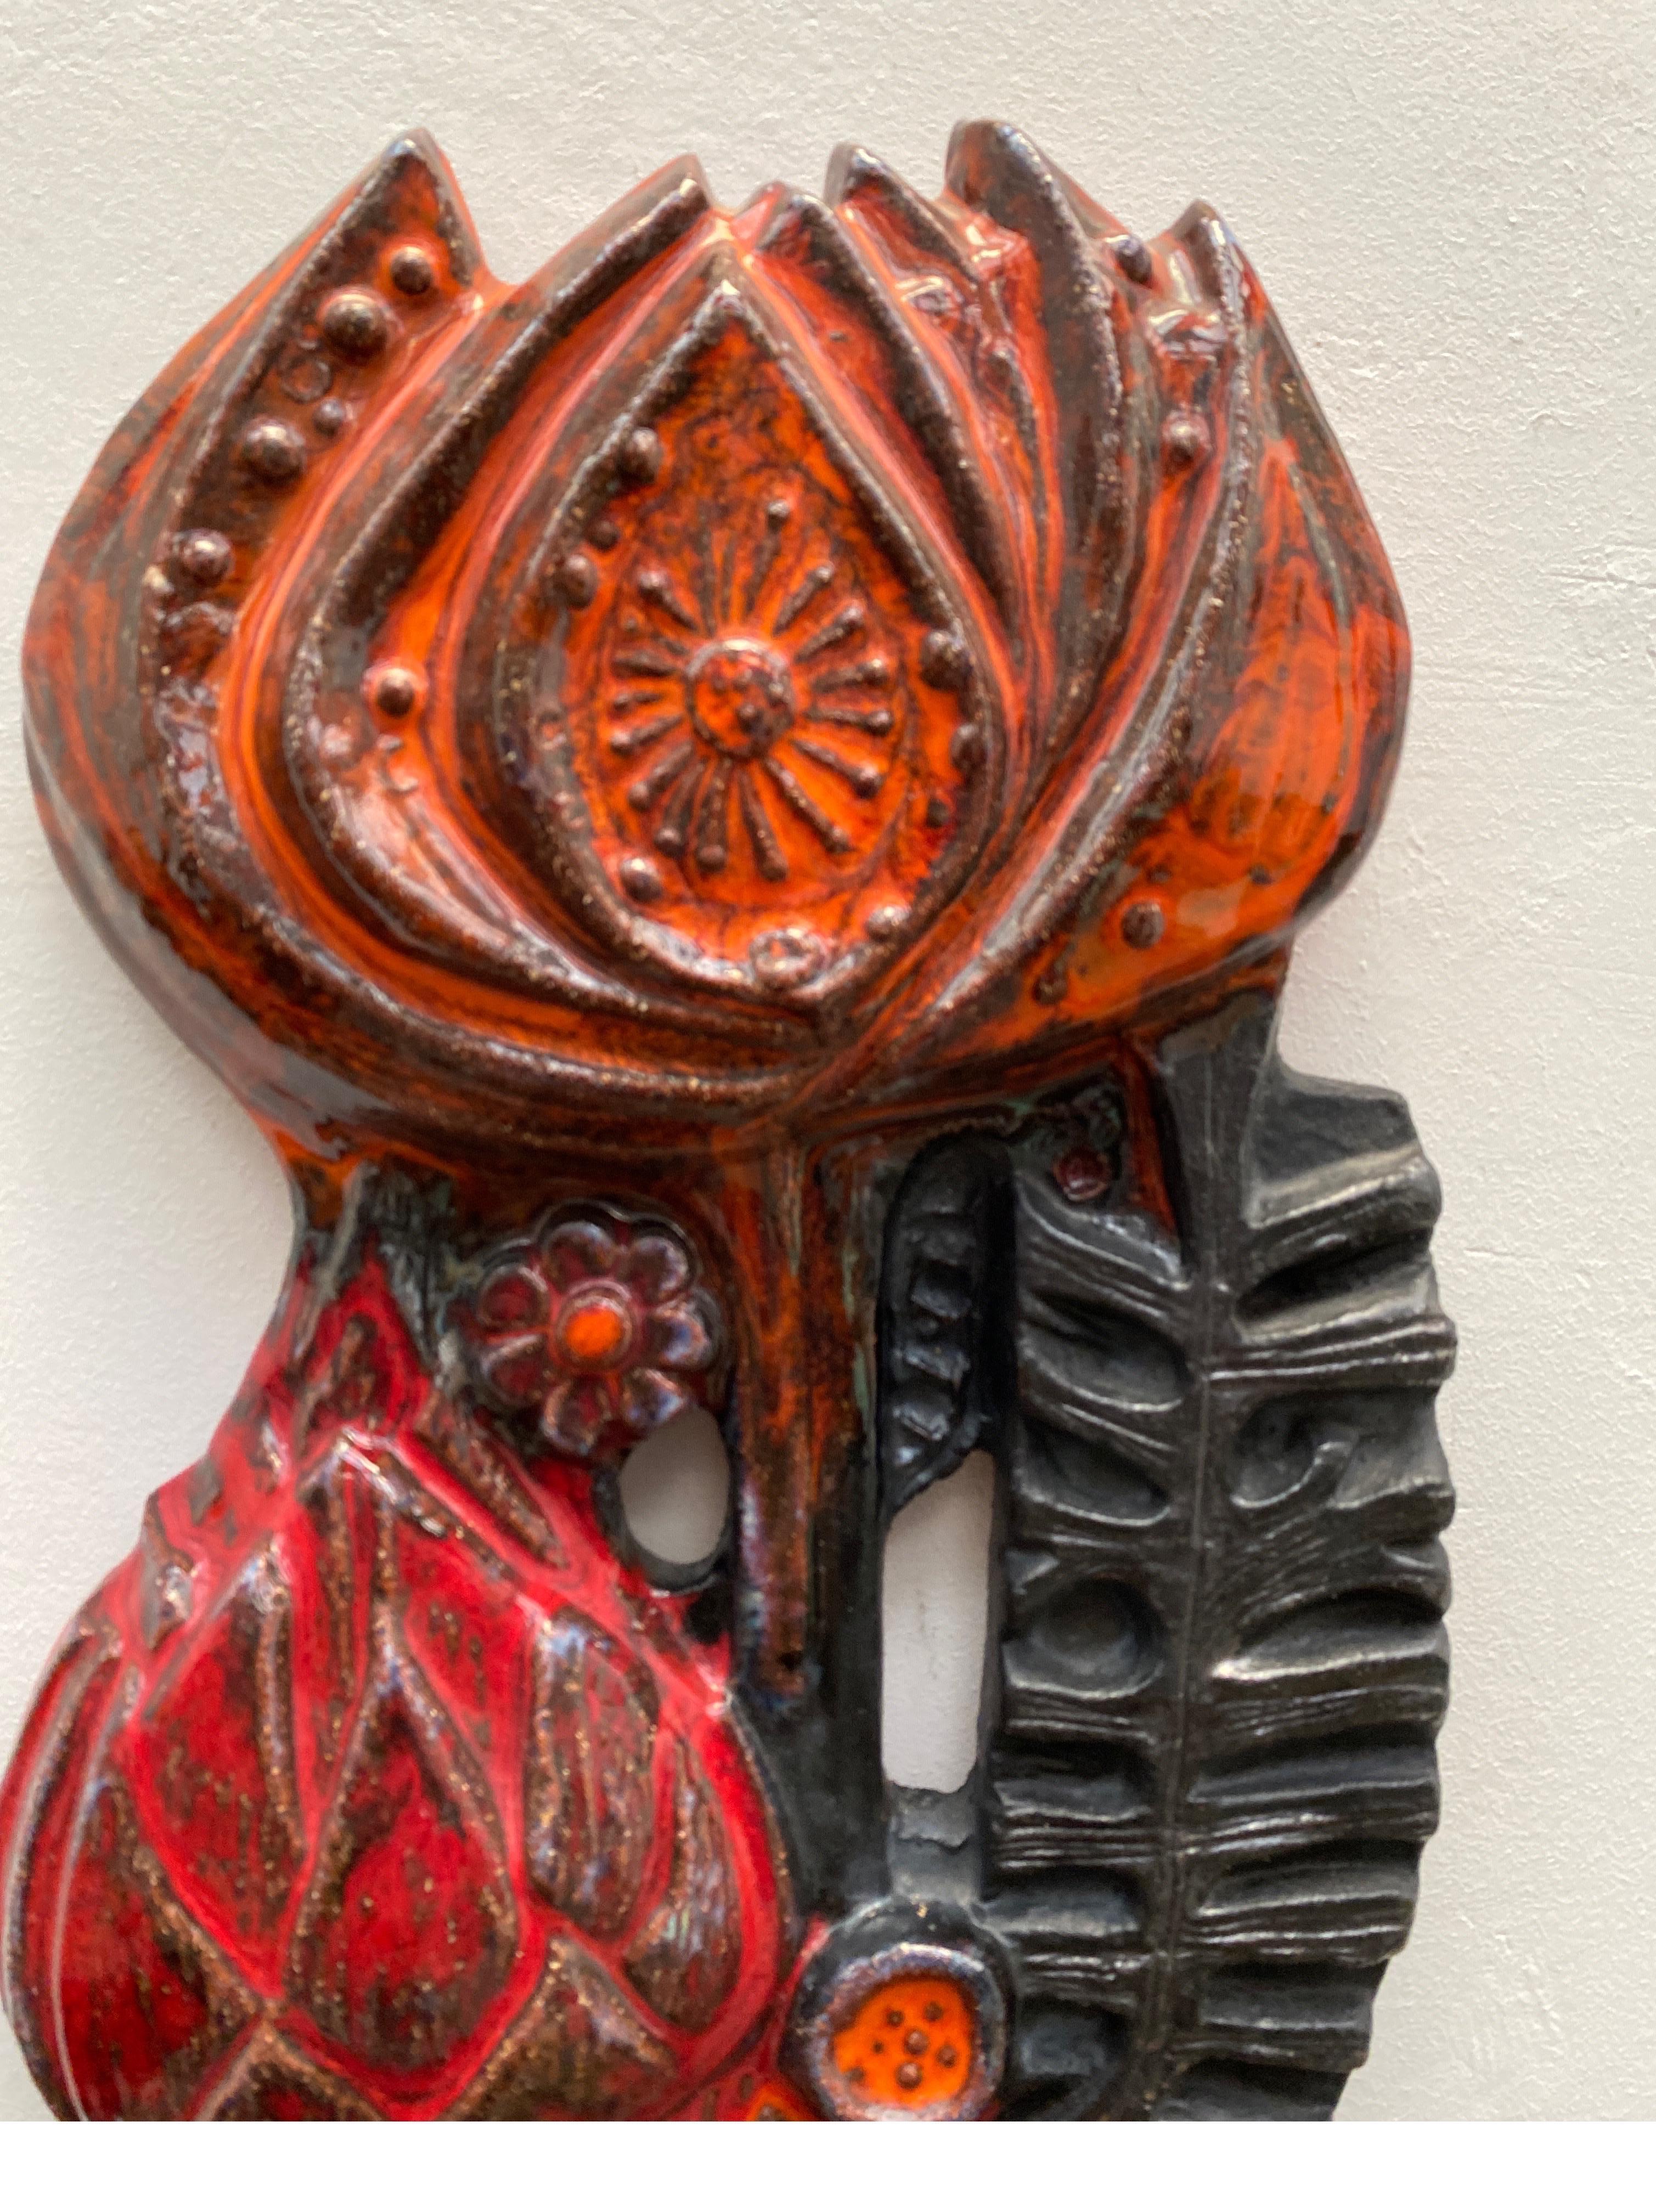 Beautiful abstracted flower wall sculpture was a cooperation between Perignem and Paul Vermeire a decorative ceramic wall sculpture with colors in deep red, black and orange glaze. The sculpture is in perfect condition. It is not marked.